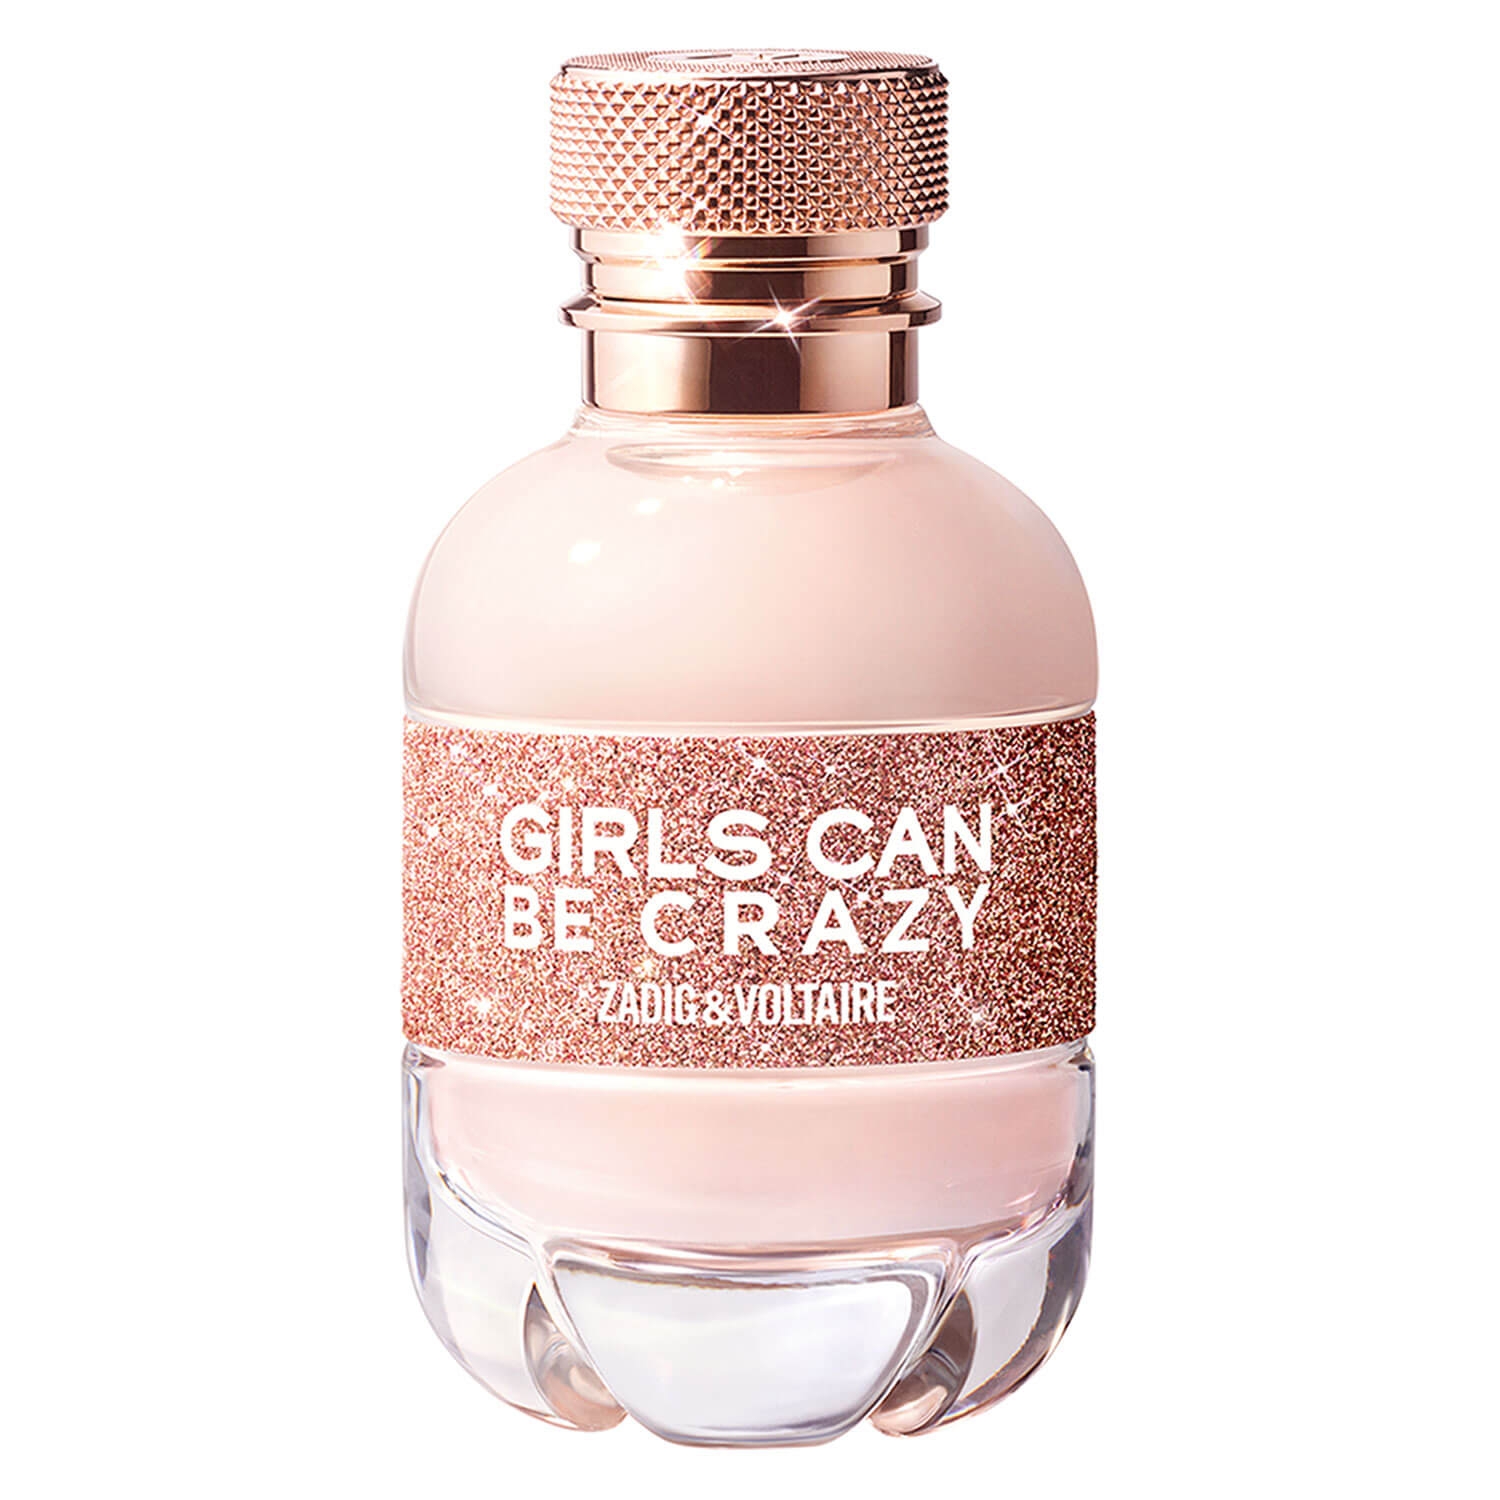 Product image from Girls Can Be Crazy - Eau de Parfum